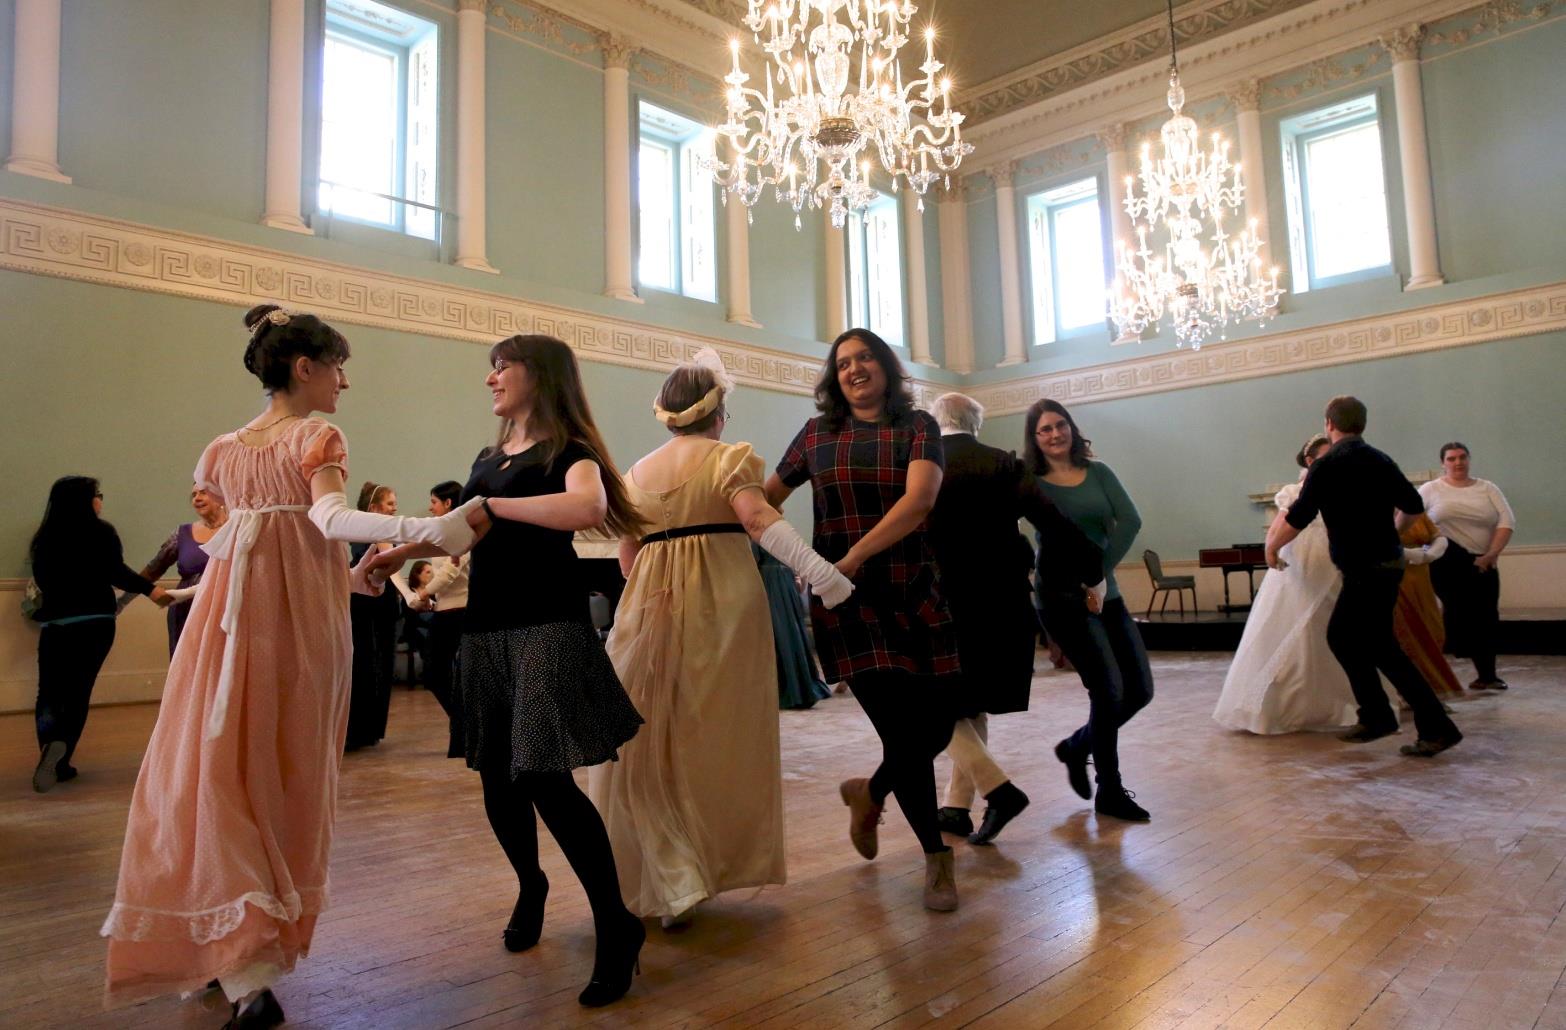 opportunity to learn Georgian dances, listen to 18th century music, gamble at the card tables, try on fancy costumes and make-up,